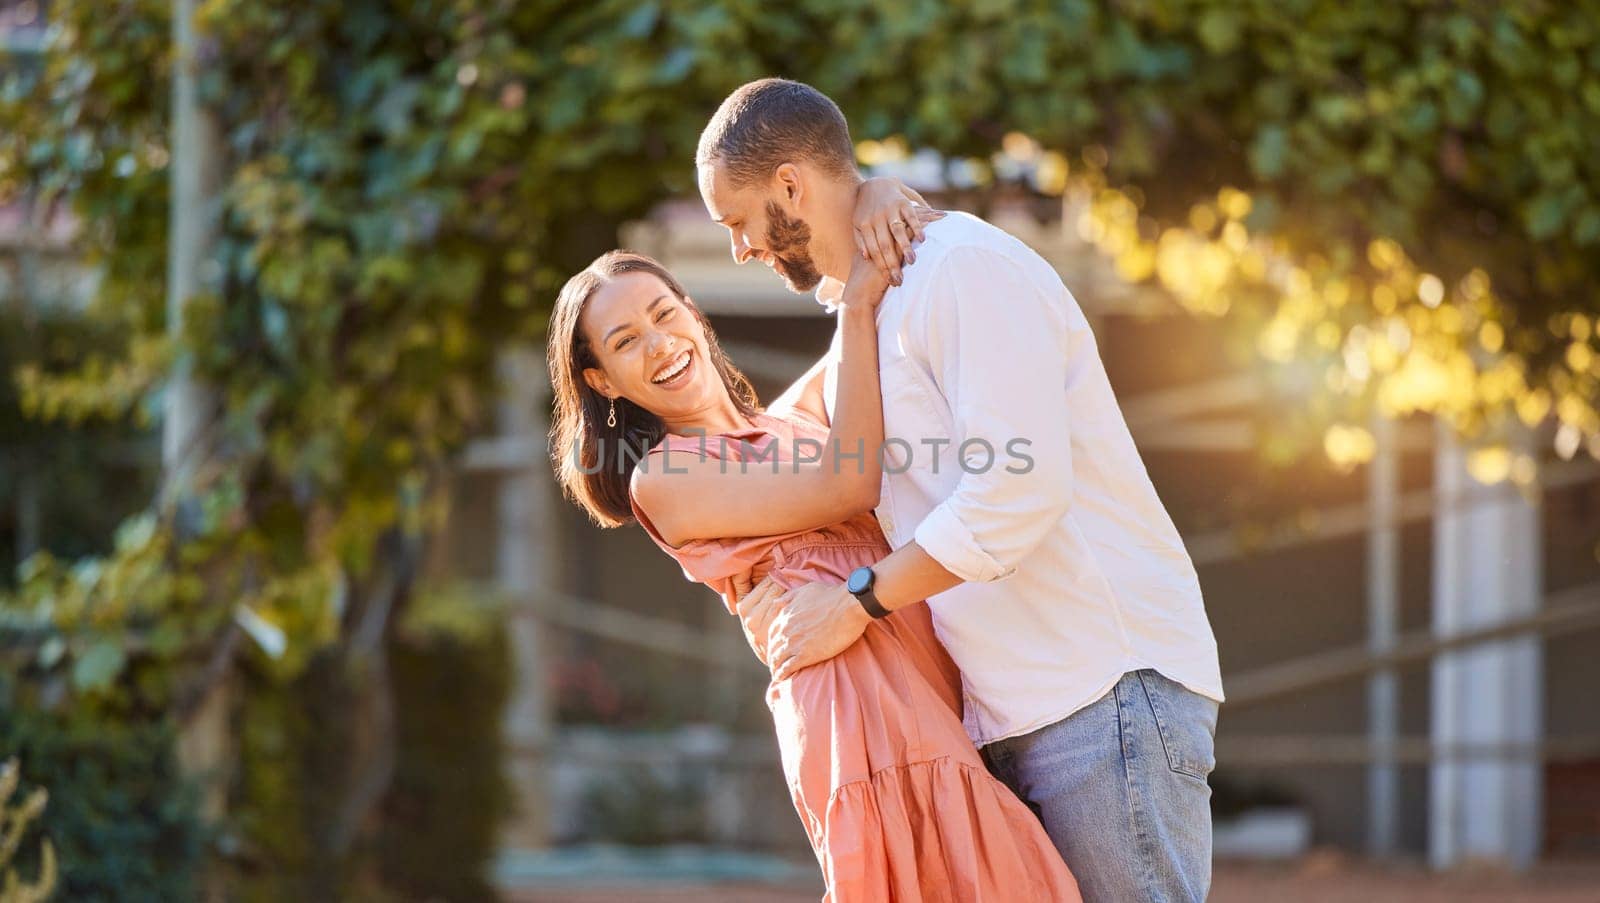 Couple, hug and love in nature park, smile and happy together with relationship and romance on outdoor date. Bonding, care and romantic, man holding woman and spending quality time outside